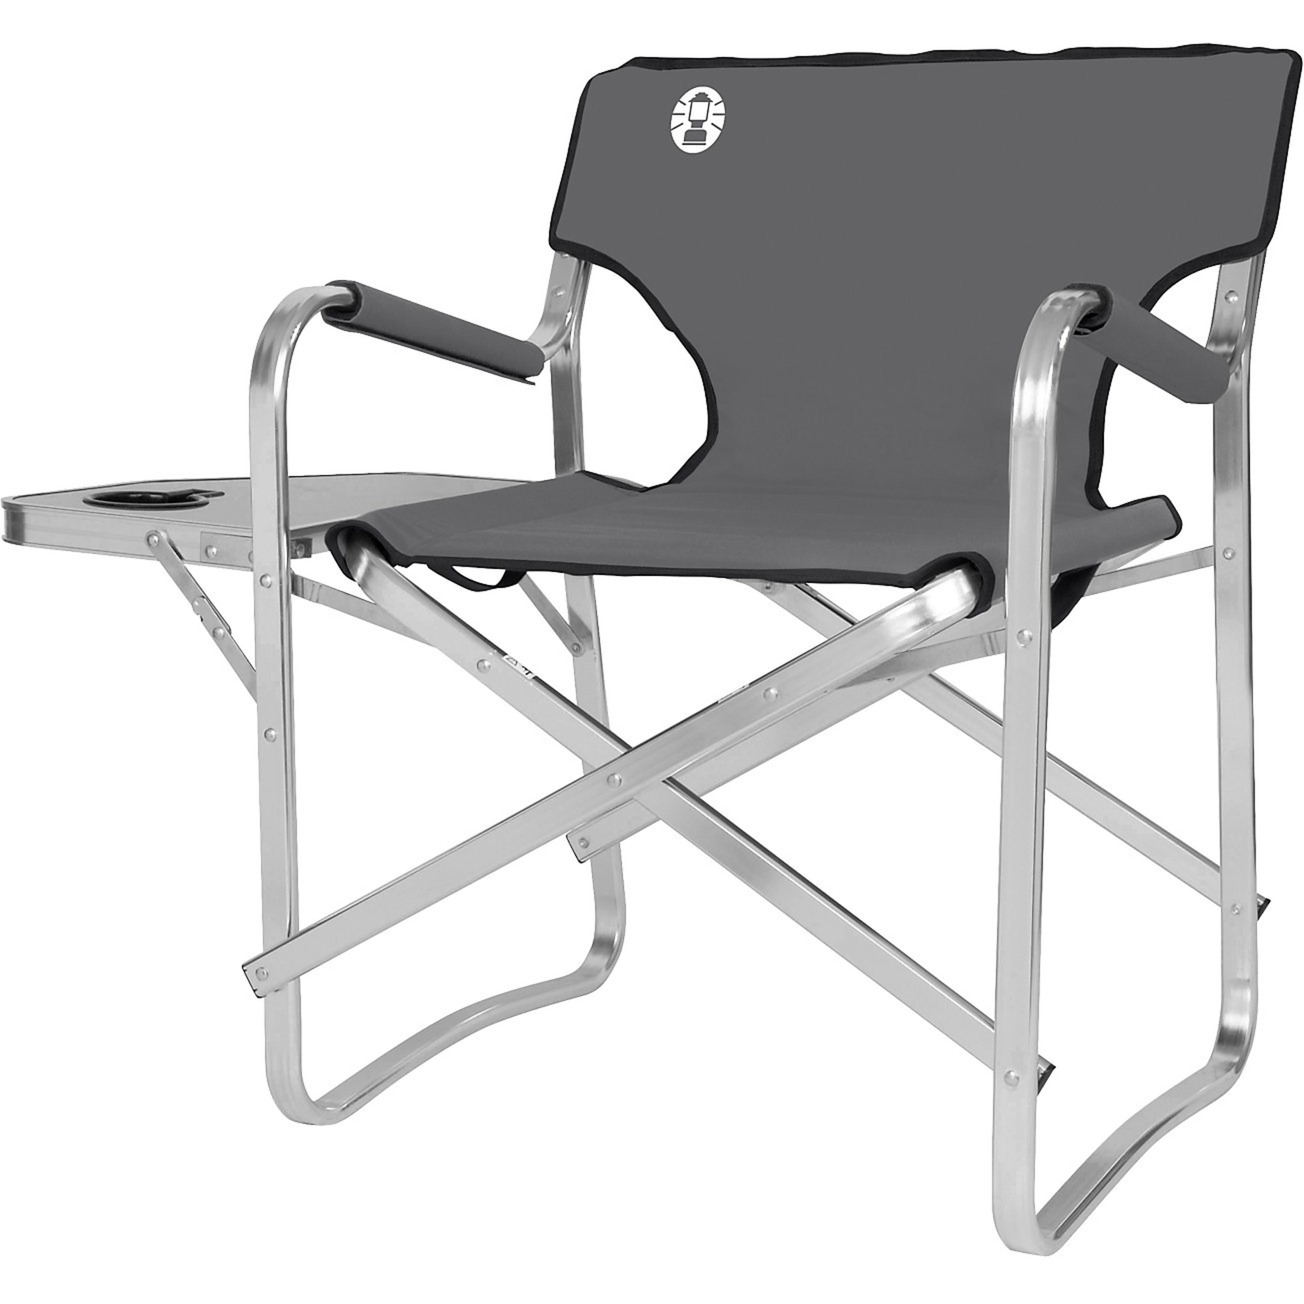 Aluminium Deck Chair with Table 2000038341, Camping-Stuhl von Coleman